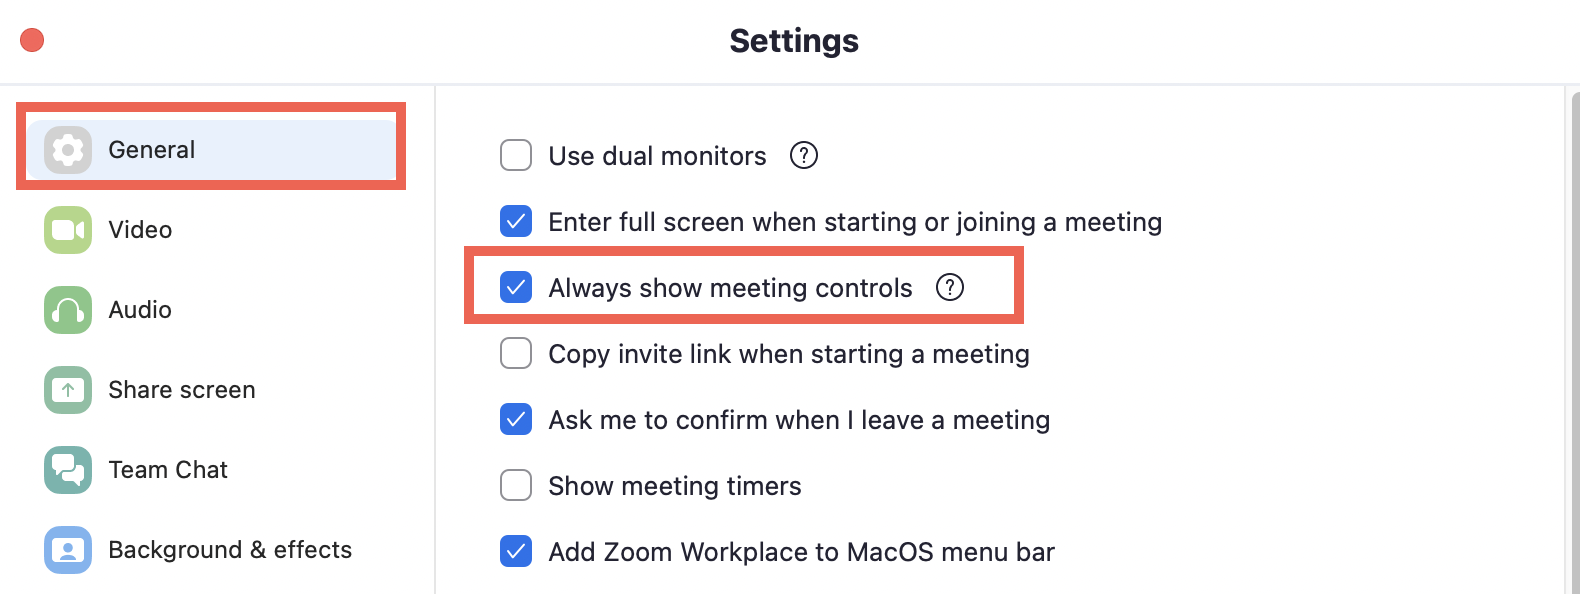 The image shows in General settings, to check the option Always show meeting controls.